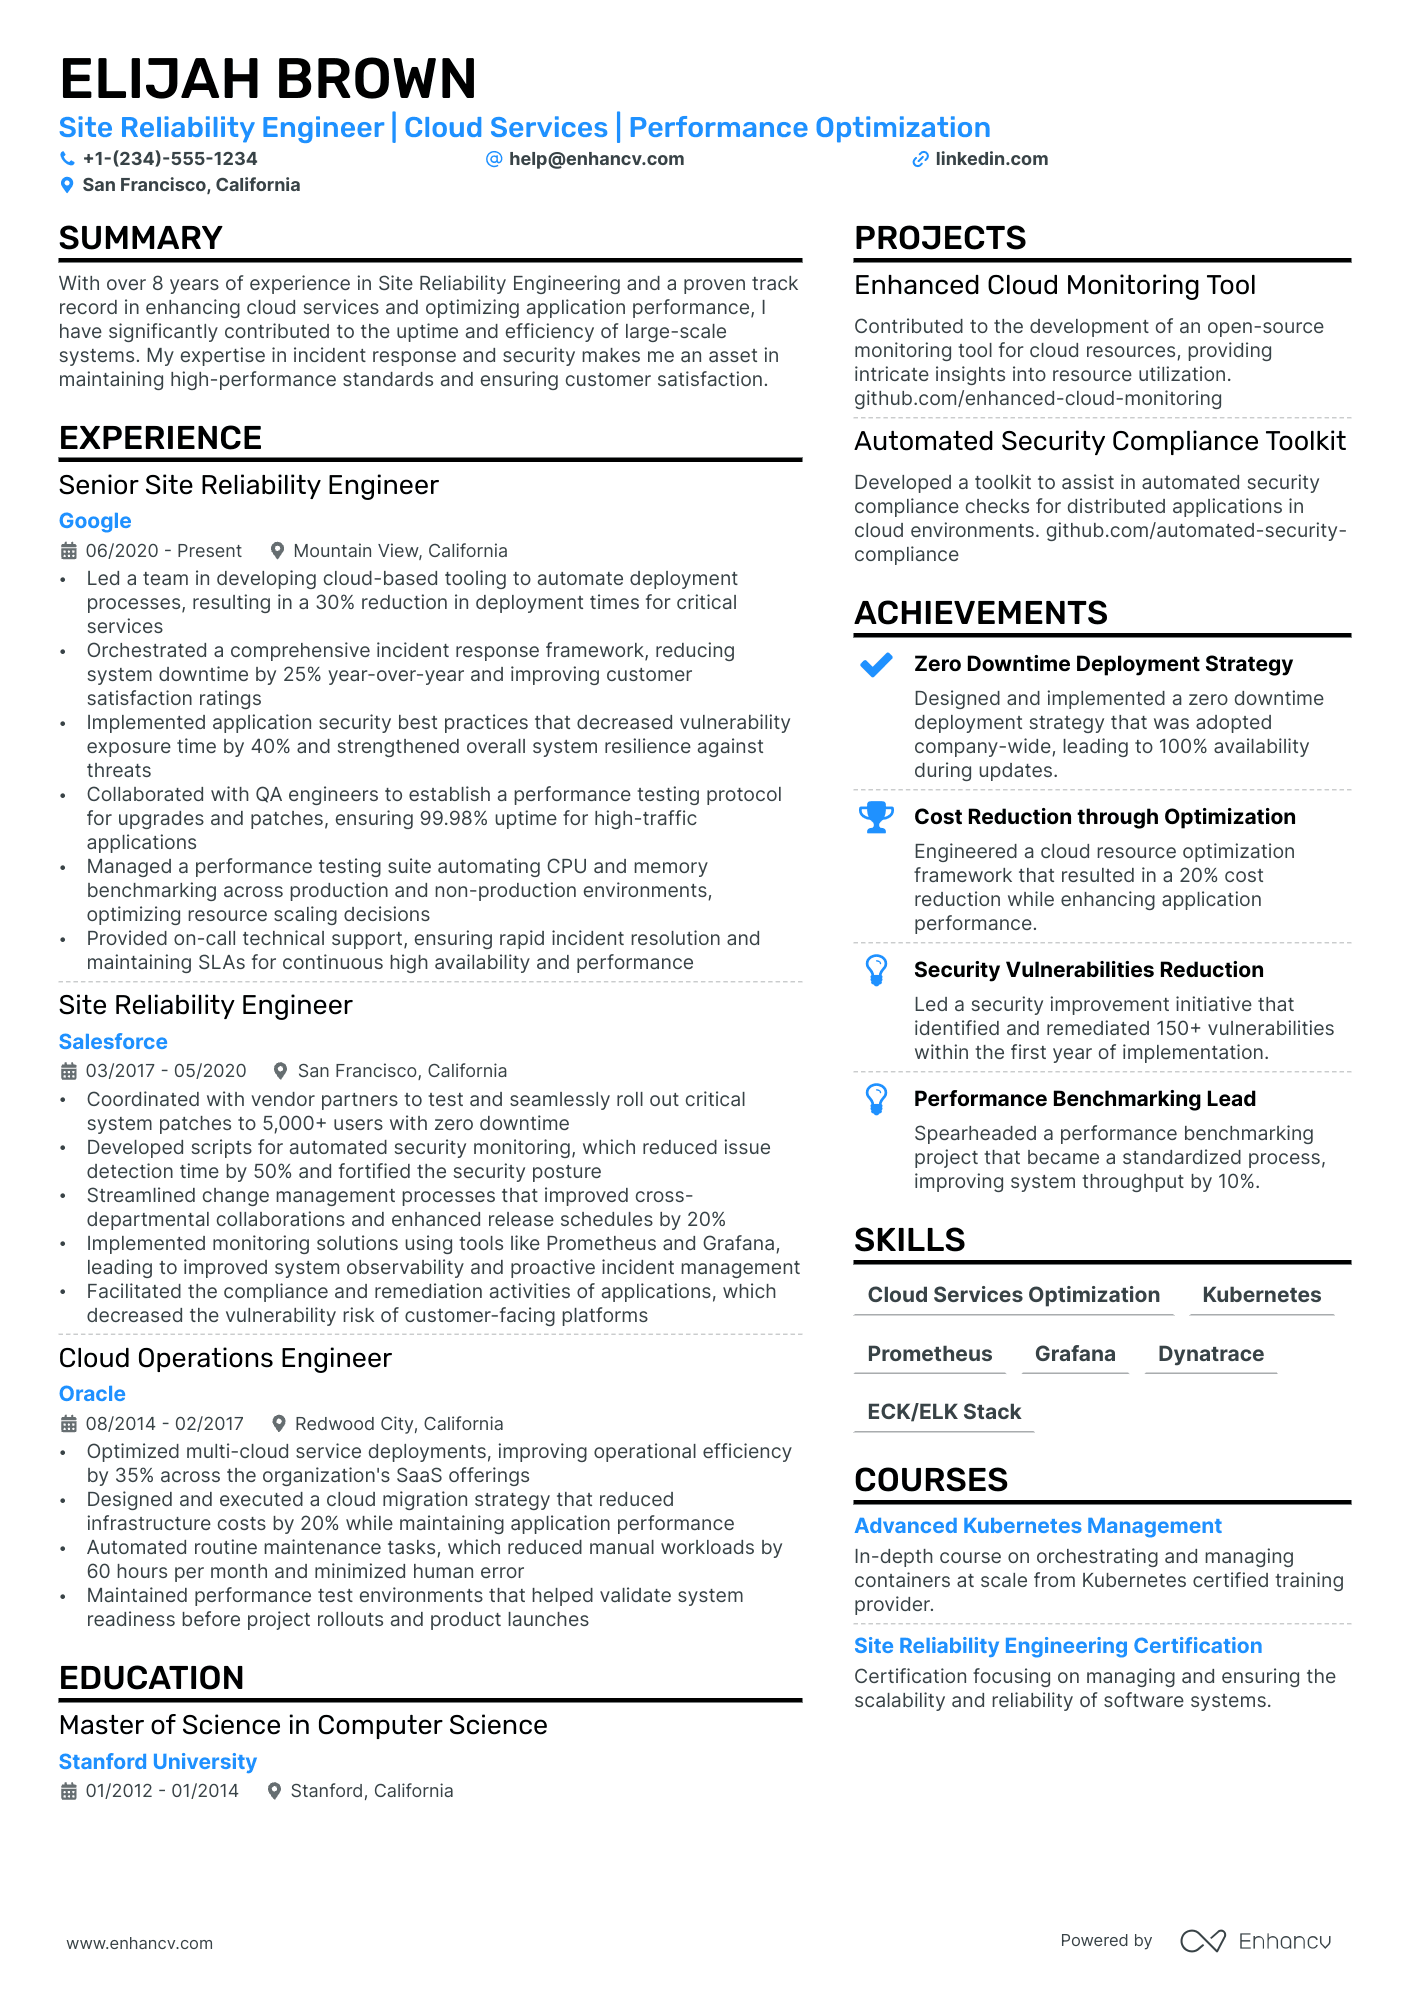 Site Reliability Engineer resume example